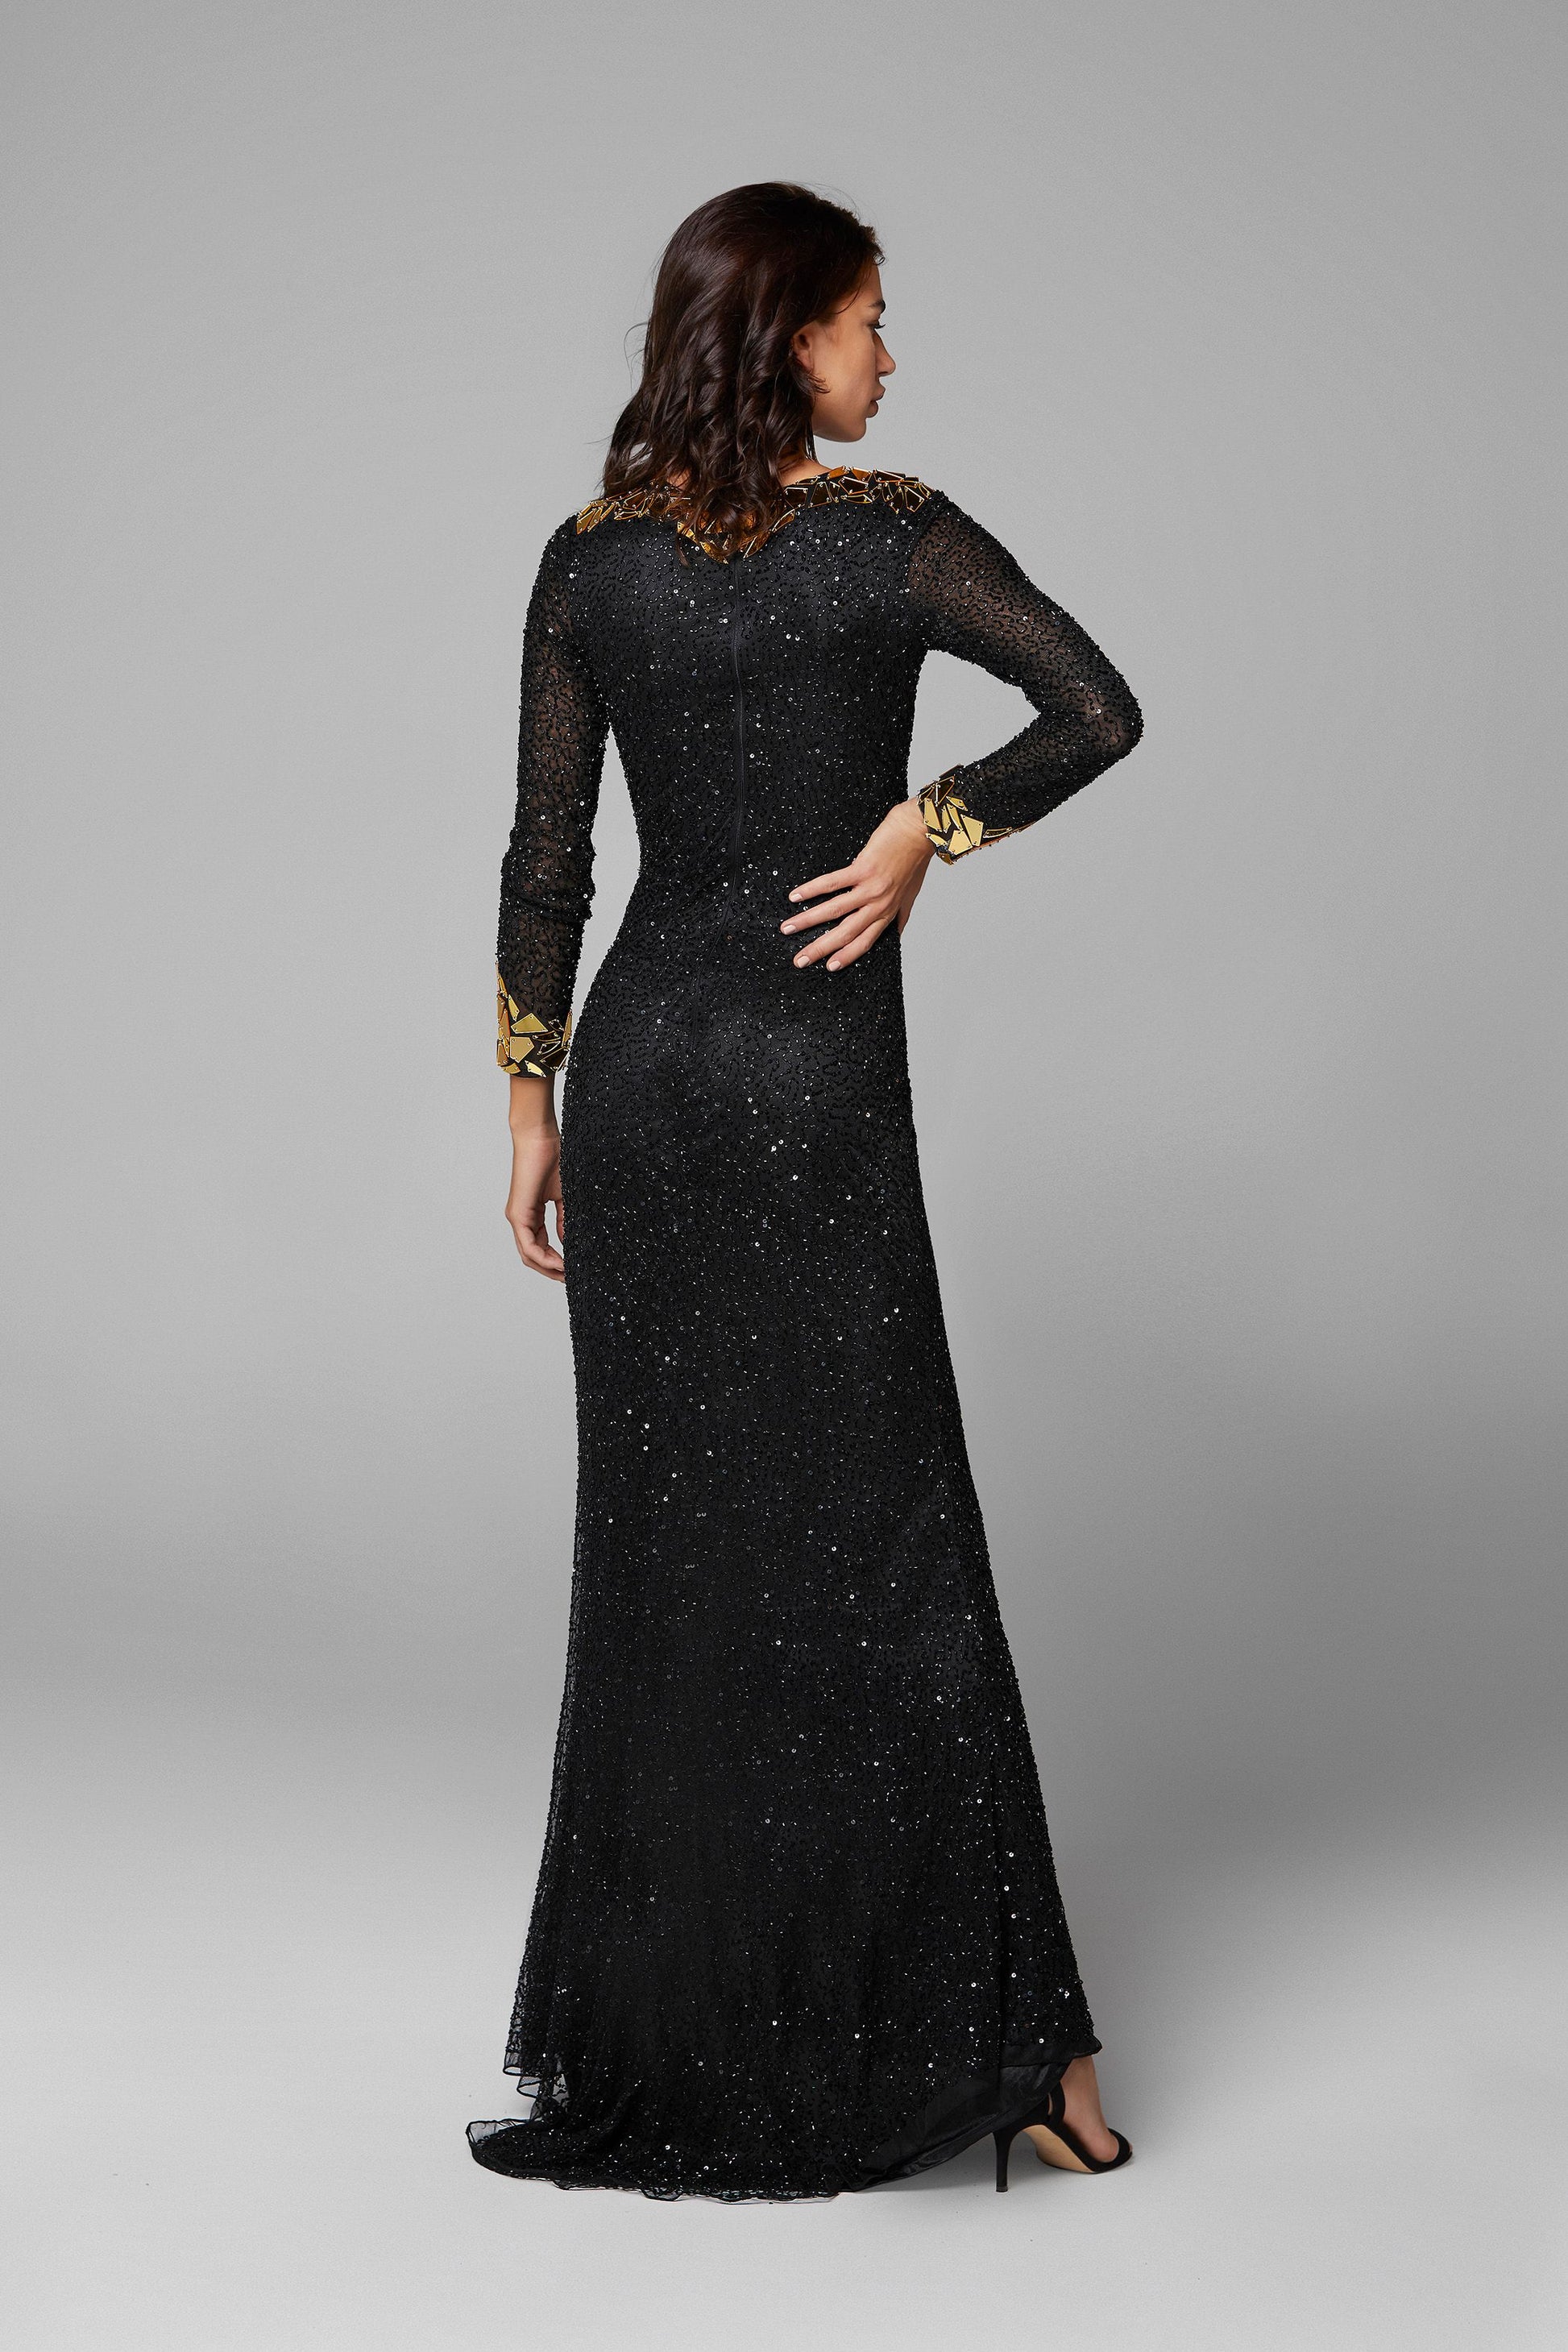 Primavera Couture 3614 is a long sleeve fitted fully Embellished formal prom dress evening gown. Featuring a high neckline and long sheer sleeves. This gown is accented with cut glass pieces around the neckline, end of sleeves & Around the slit on this stunning Prom & Pageant Gown. Sweeping train.  Available Sizes: 00,0,2,4,6,8,10,12,14,16,18,20,22,24  Available Colors: Black/Gold, Black/Multi, Ivory, Raspberry